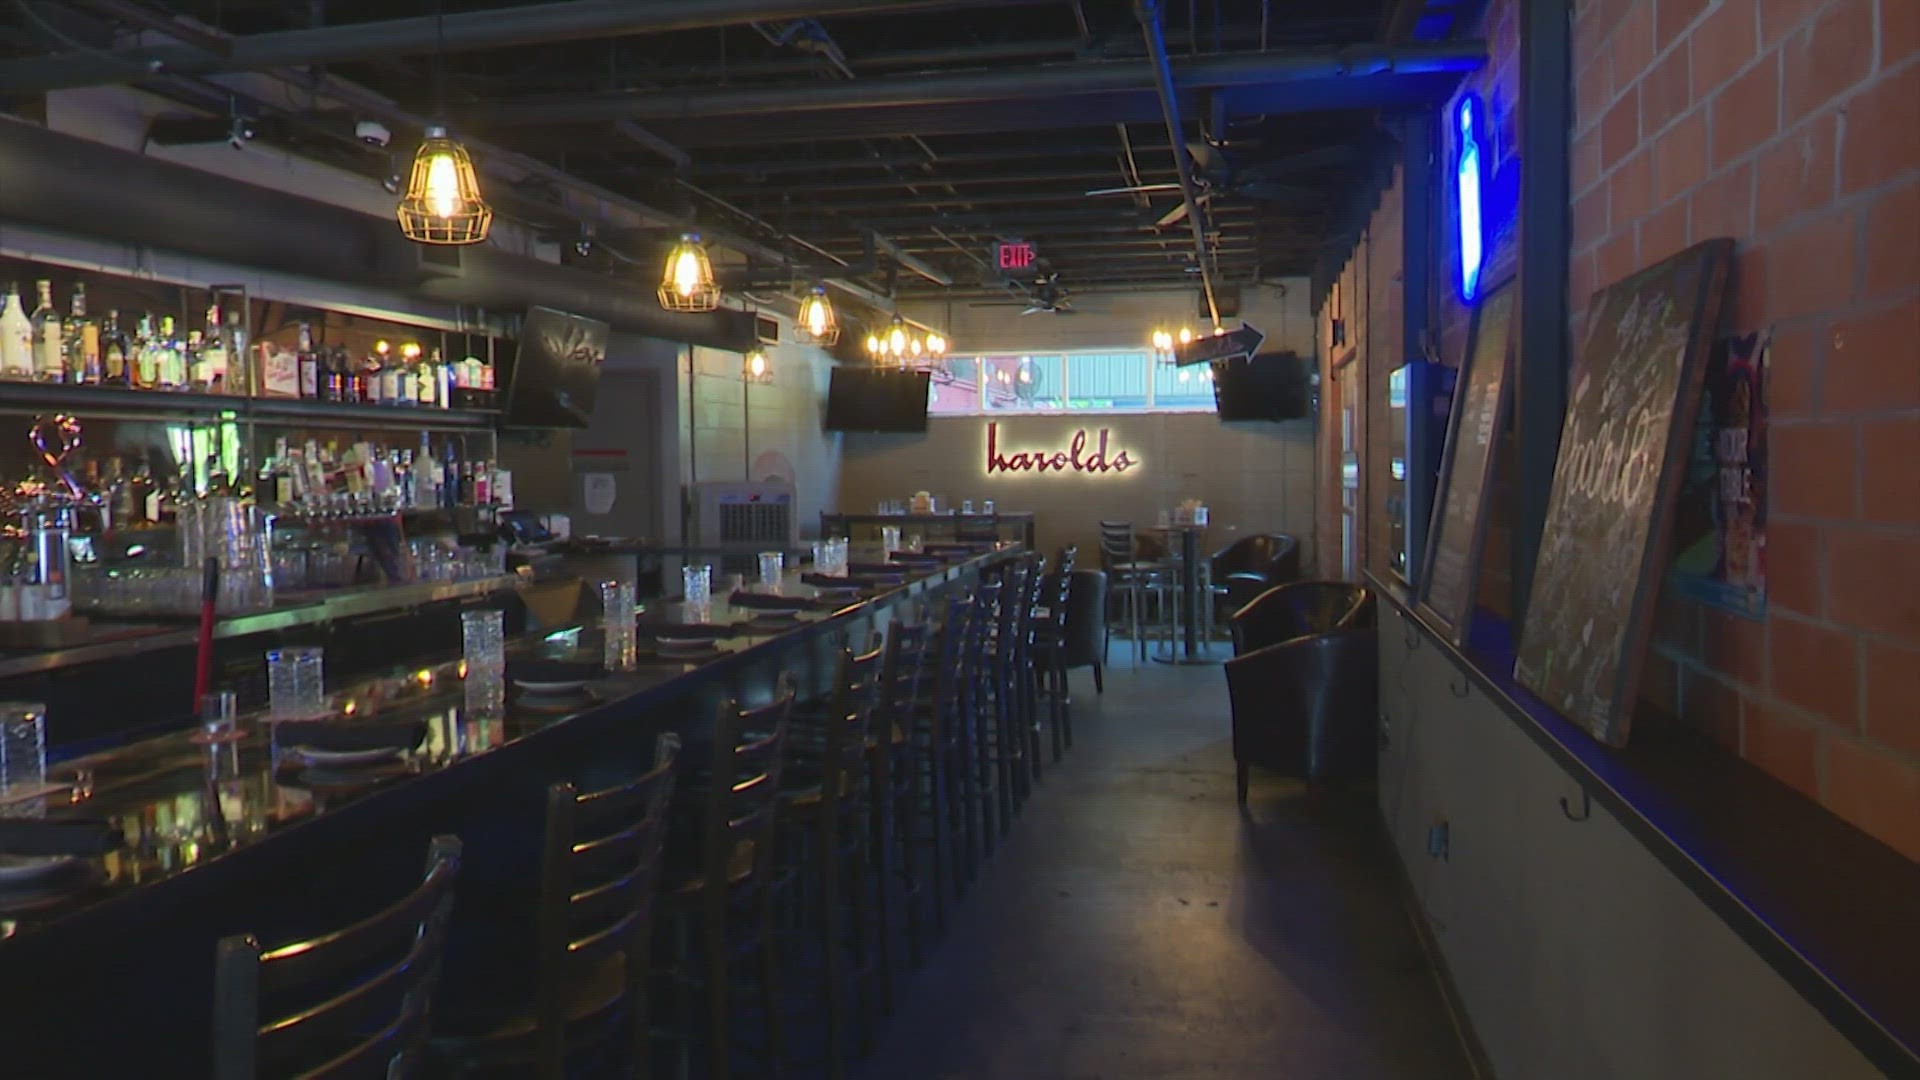 One Houston restaurant owner said she's spent roughly $5,000 fixing AC issues at both of her businesses.